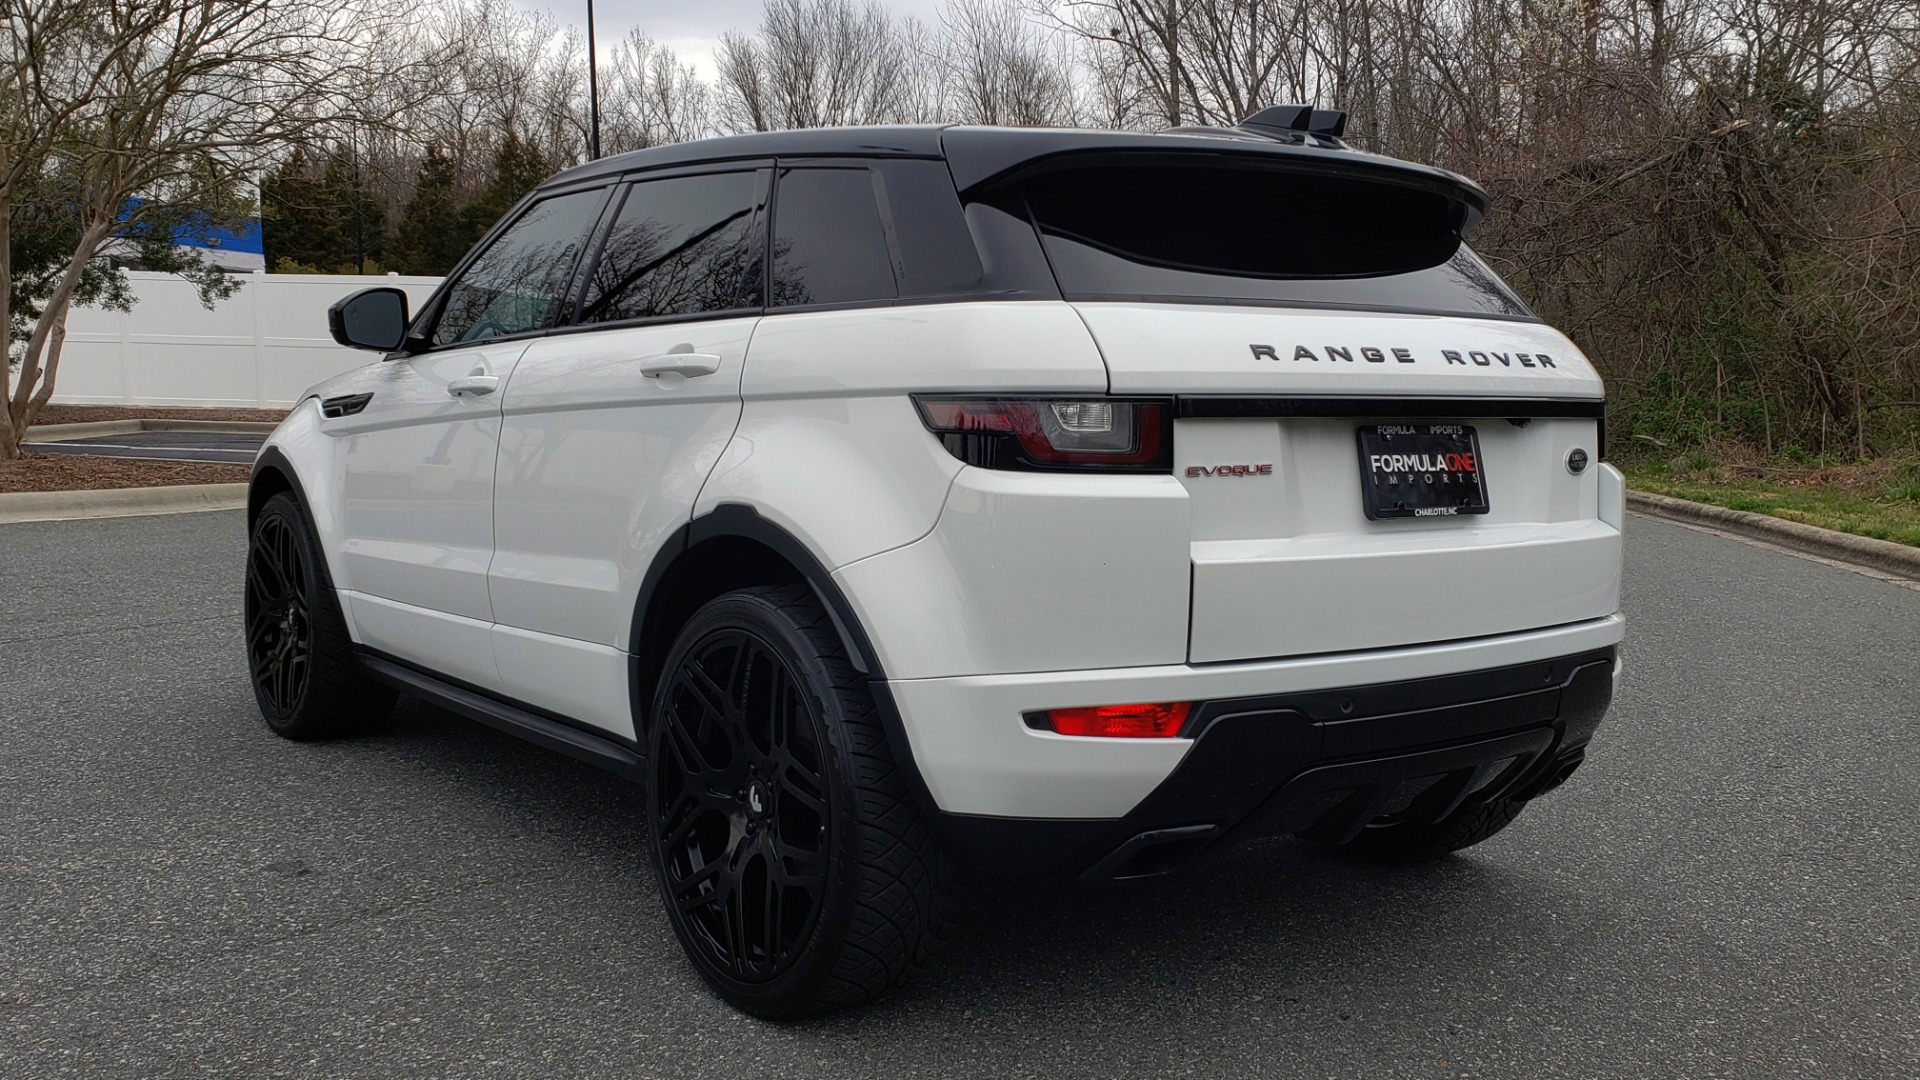 Used 2016 Land Rover RANGE ROVER EVOQUE HSE DYNAMIC / AWD / NAV / PANO-ROOF / REARVIEW / 22-IN WHEELS for sale Sold at Formula Imports in Charlotte NC 28227 4